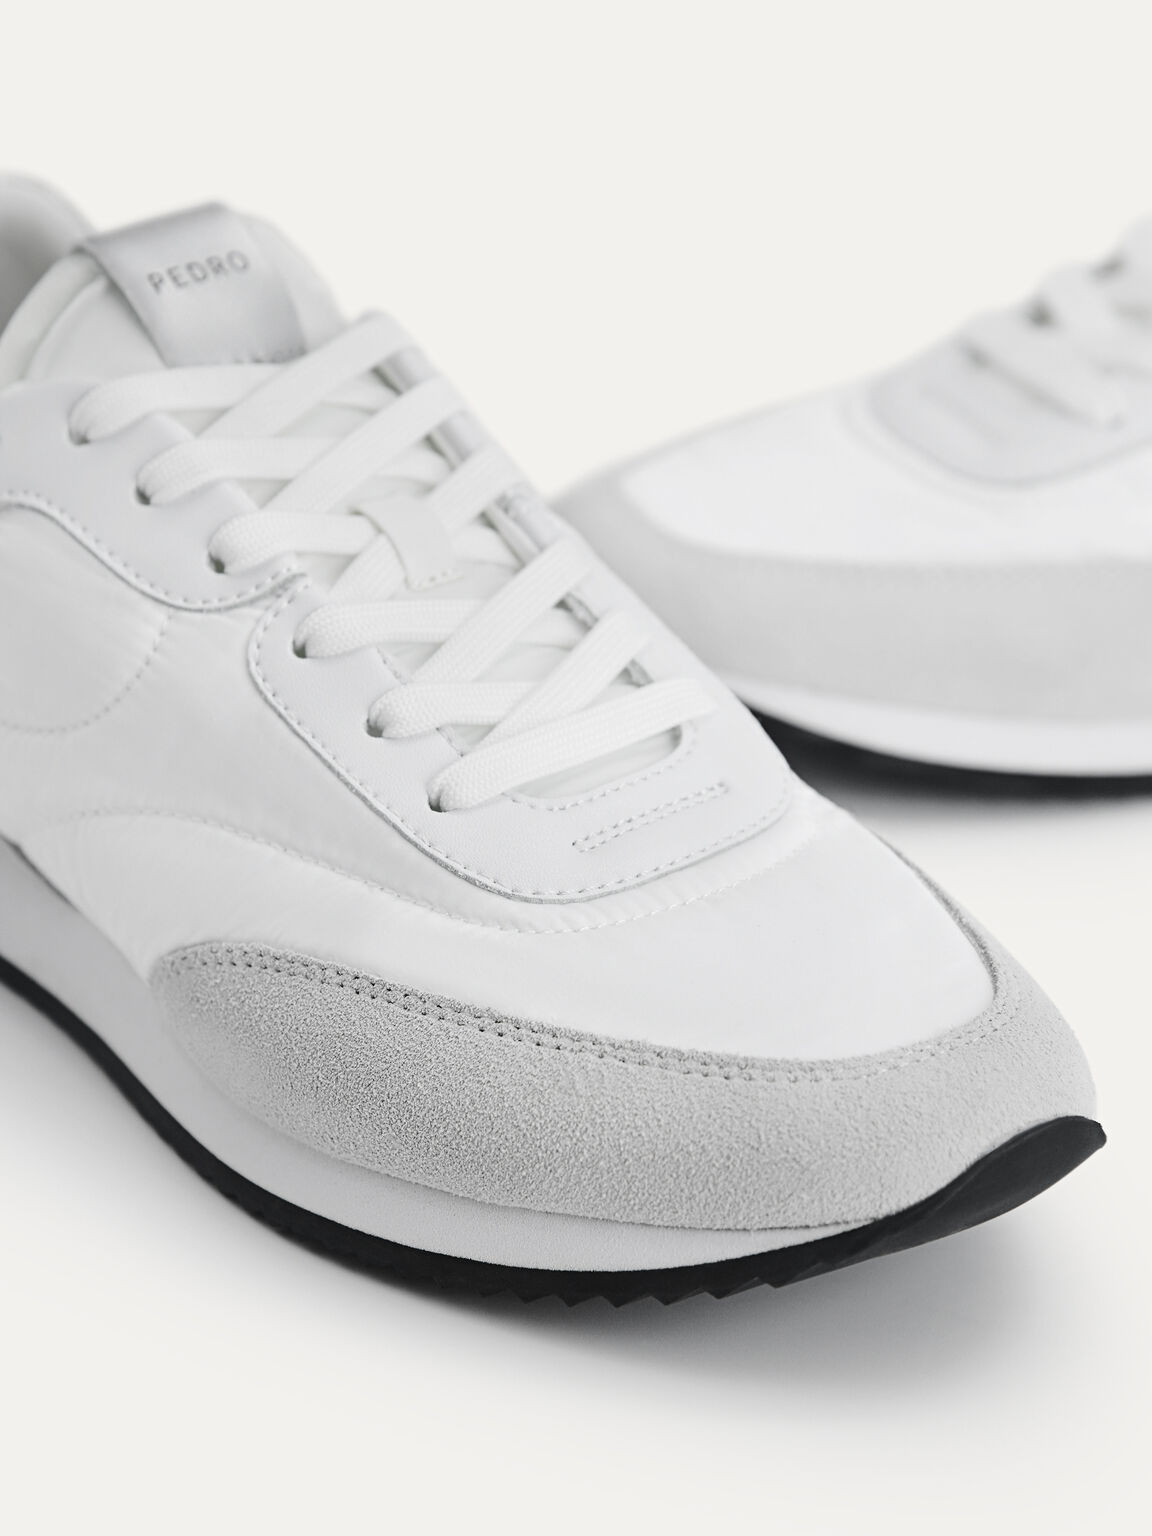 Nylon Leather Casual Sneakers, White